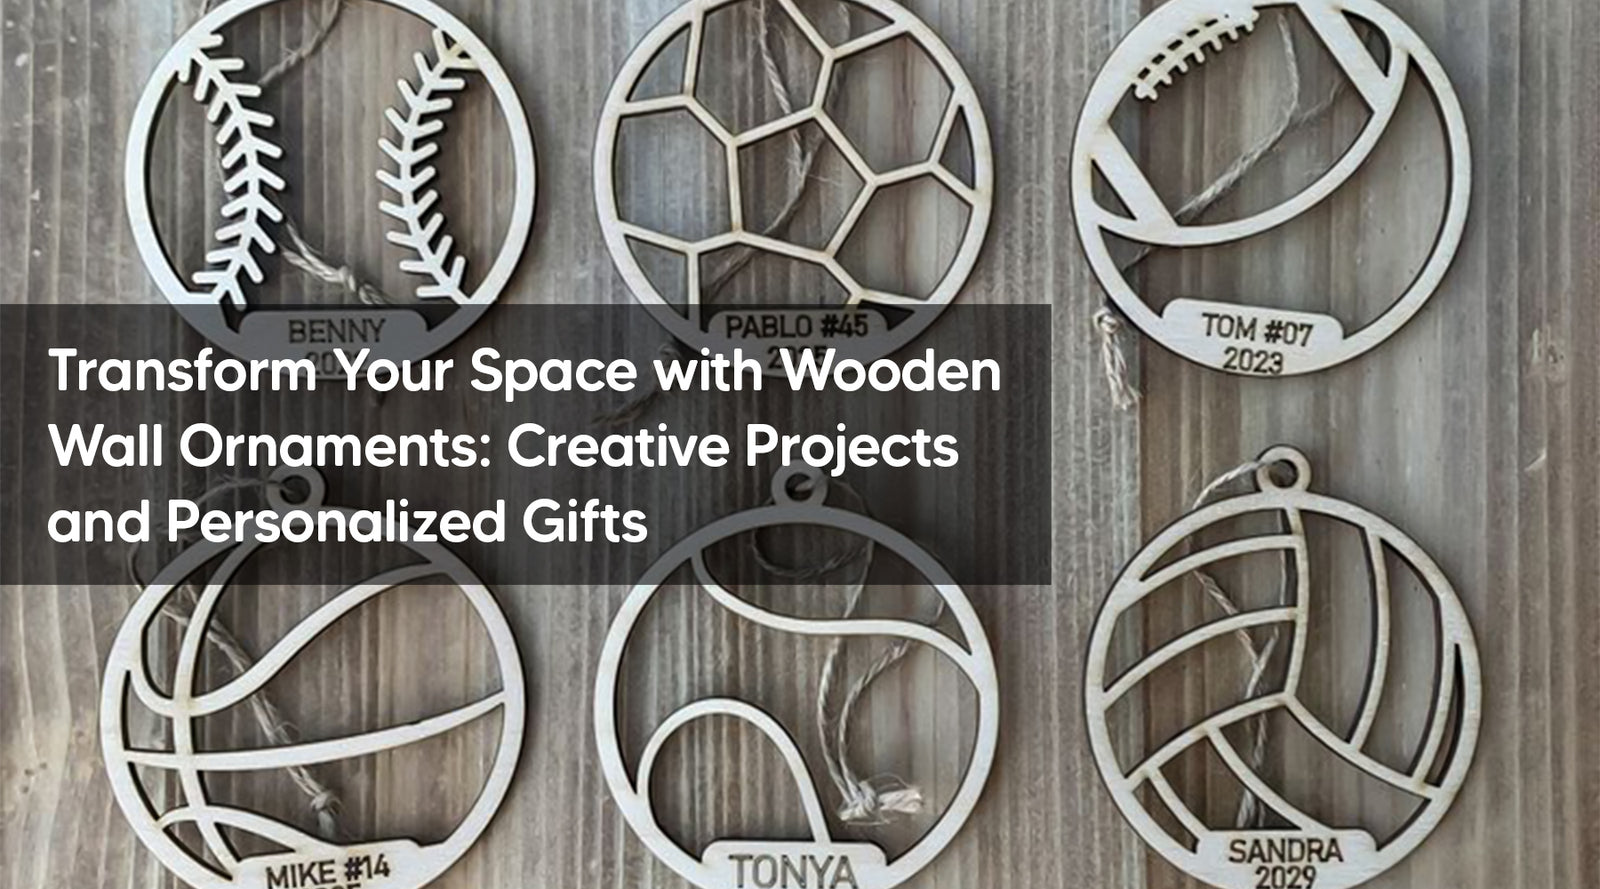 Transform Your Space with Wooden Wall Ornaments: Creative Projects and Personalized Gifts